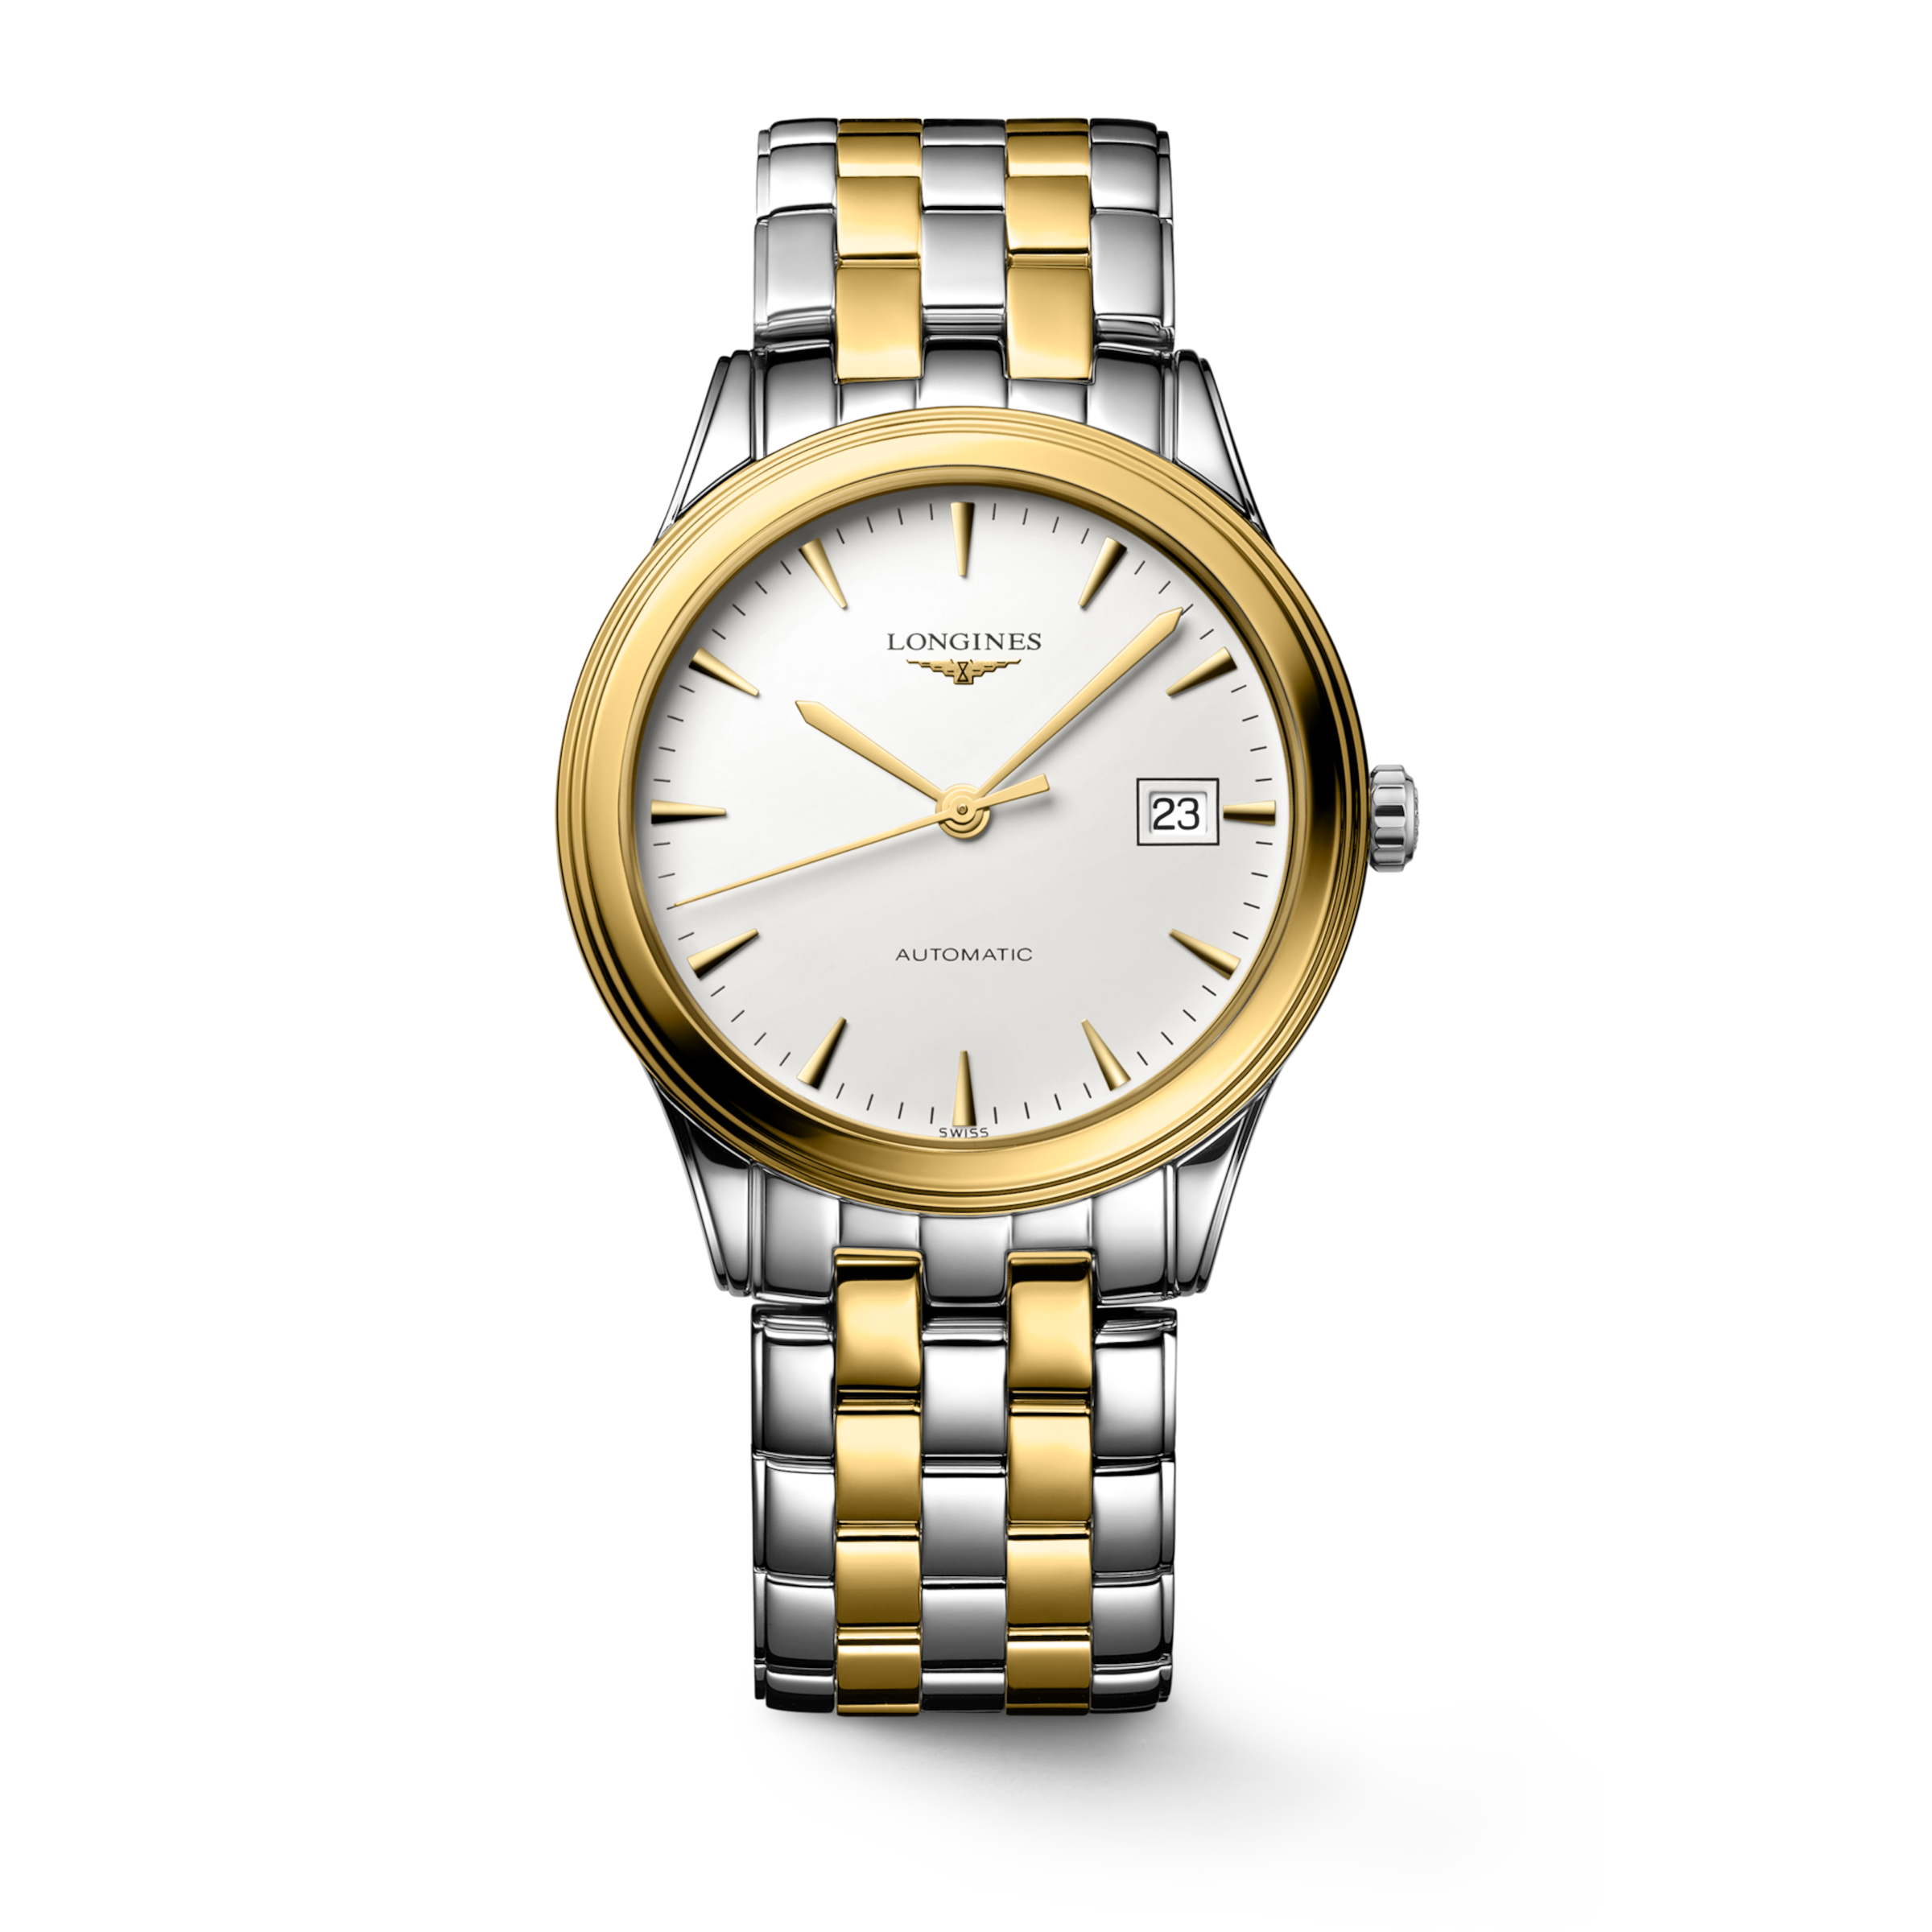 Longines FLAGSHIP Automatic Stainless steel and yellow PVD coating Watch - L4.974.3.22.7